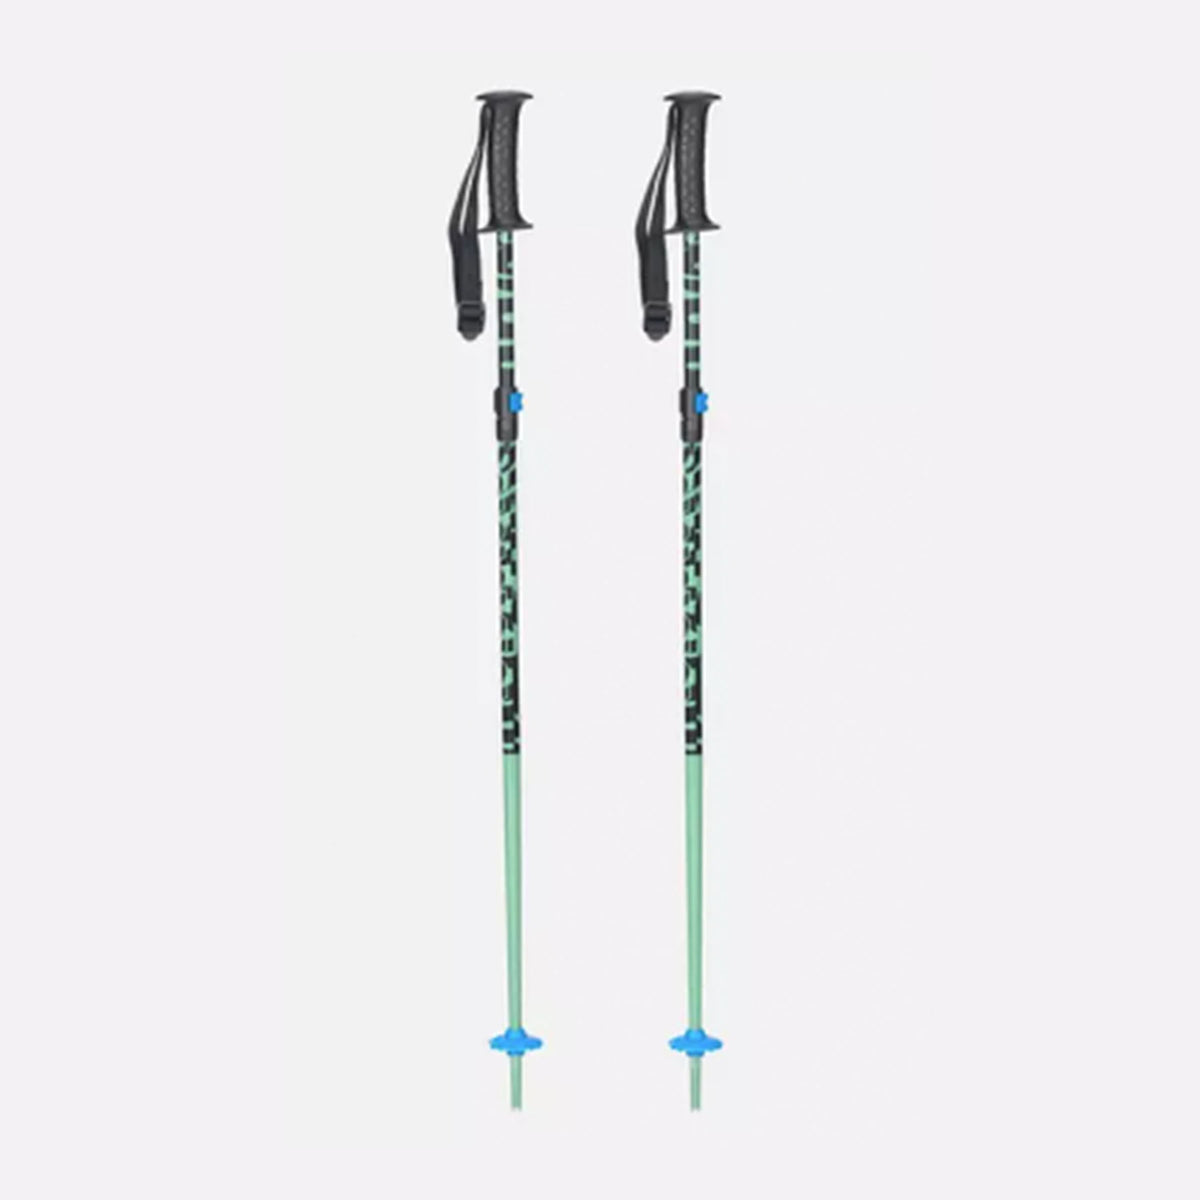 Image features the K2 Sprout Jr poles in sea foam green with black trim and black handles.